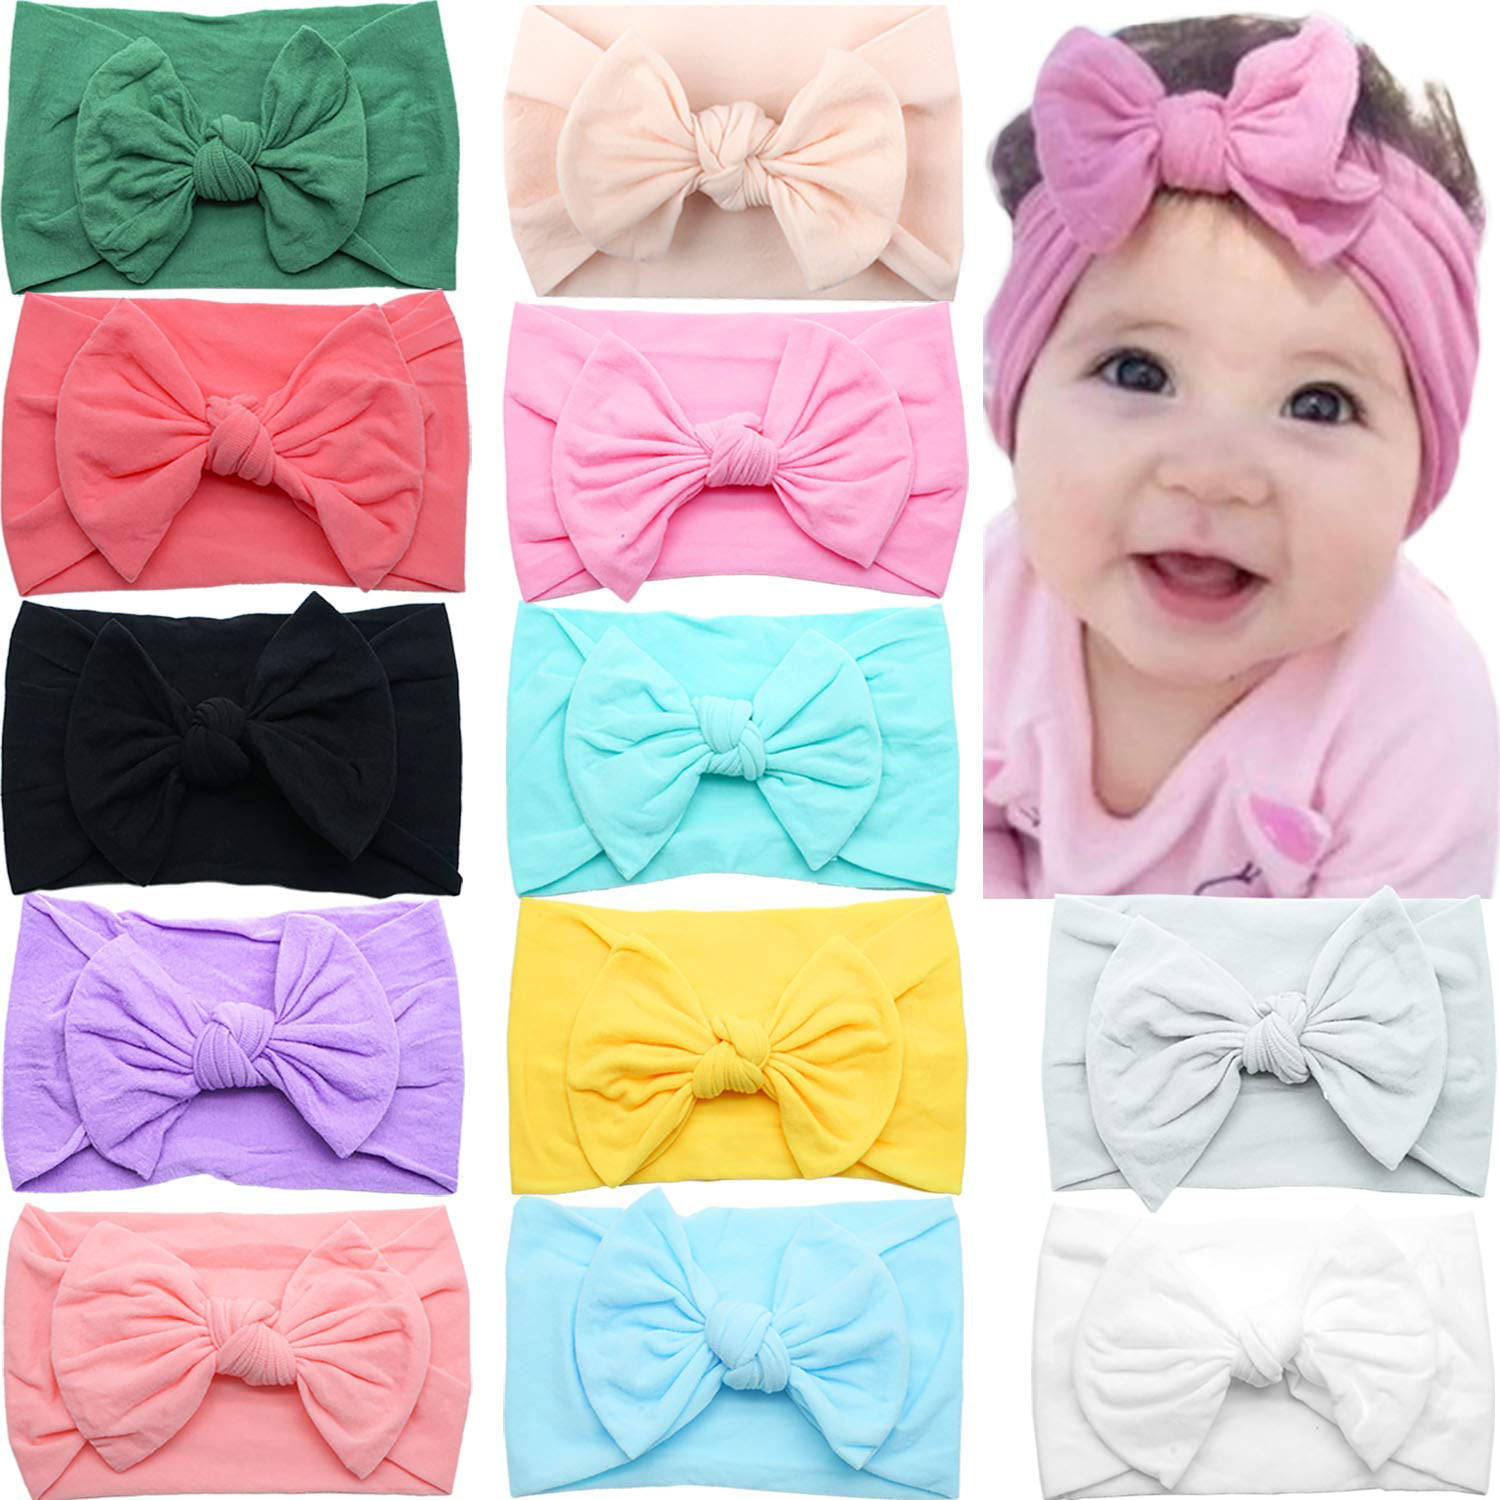 CELLOT 12 Colors Super Stretchy Soft Knot Baby Girl Headbands with Hair Bows  Head Wrap For Newborn Baby Girls Infant Toddlers Kids 